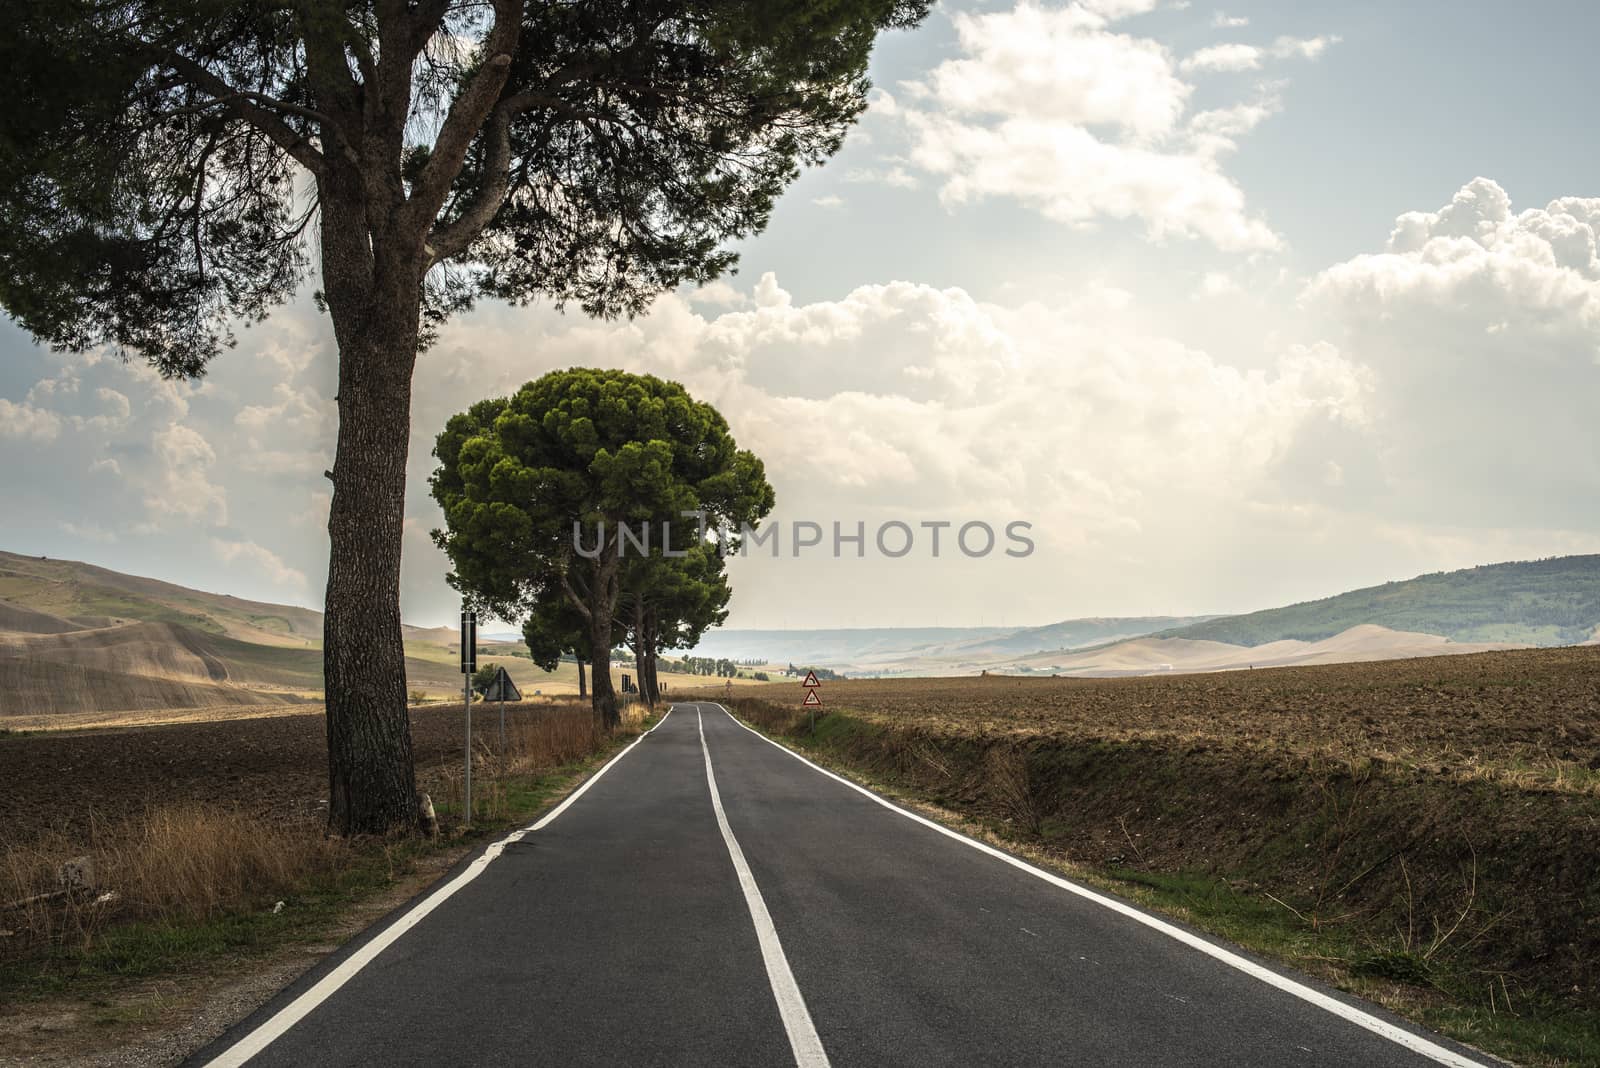 Old asphalt road with white line. Trees and agricultural land.